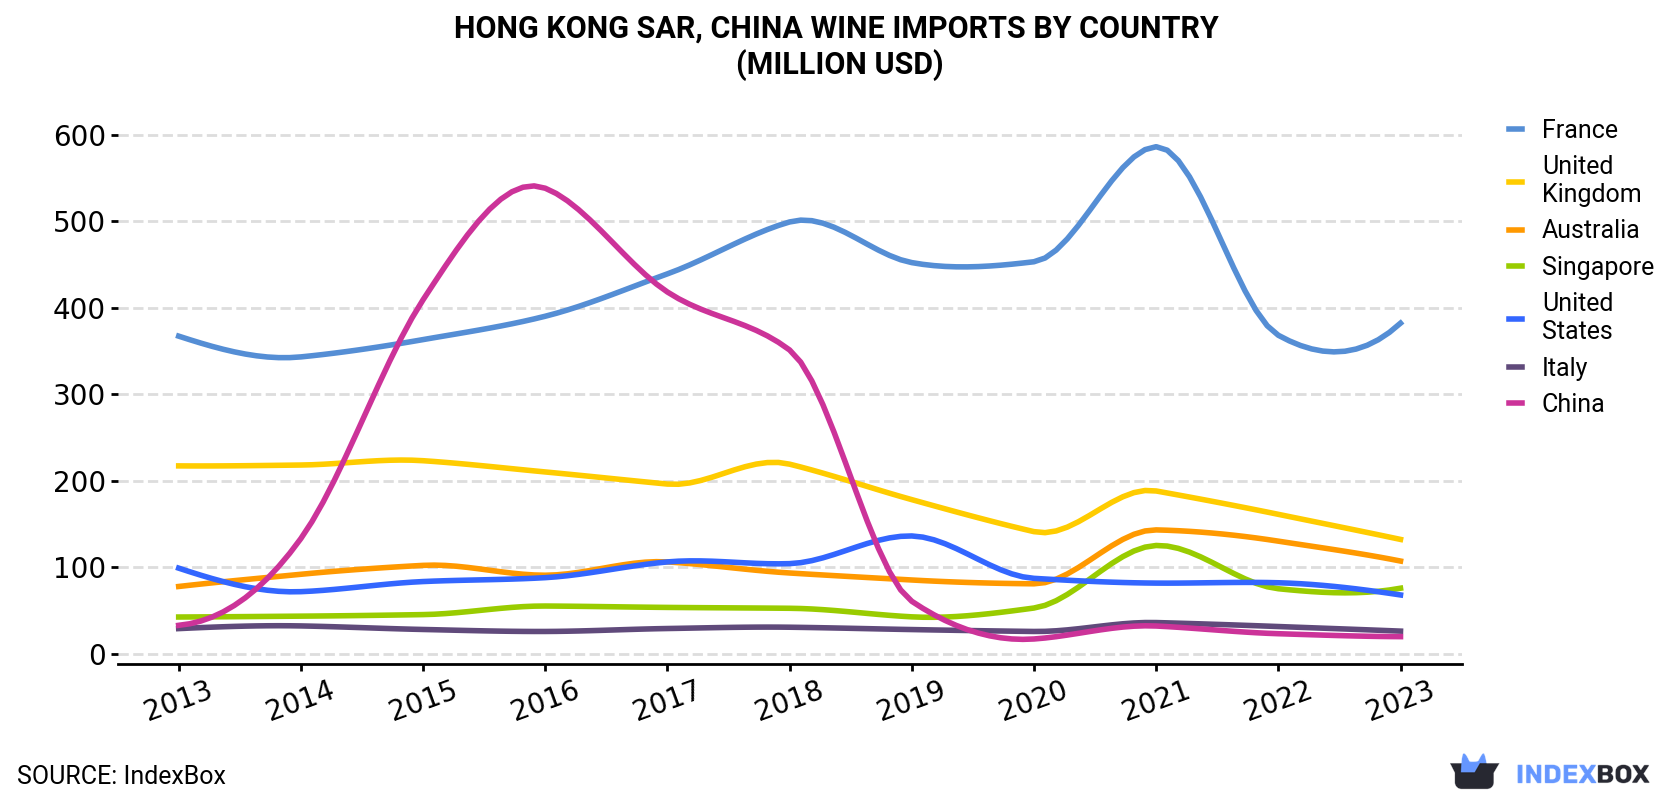 Hong Kong Wine Imports By Country (Million USD)